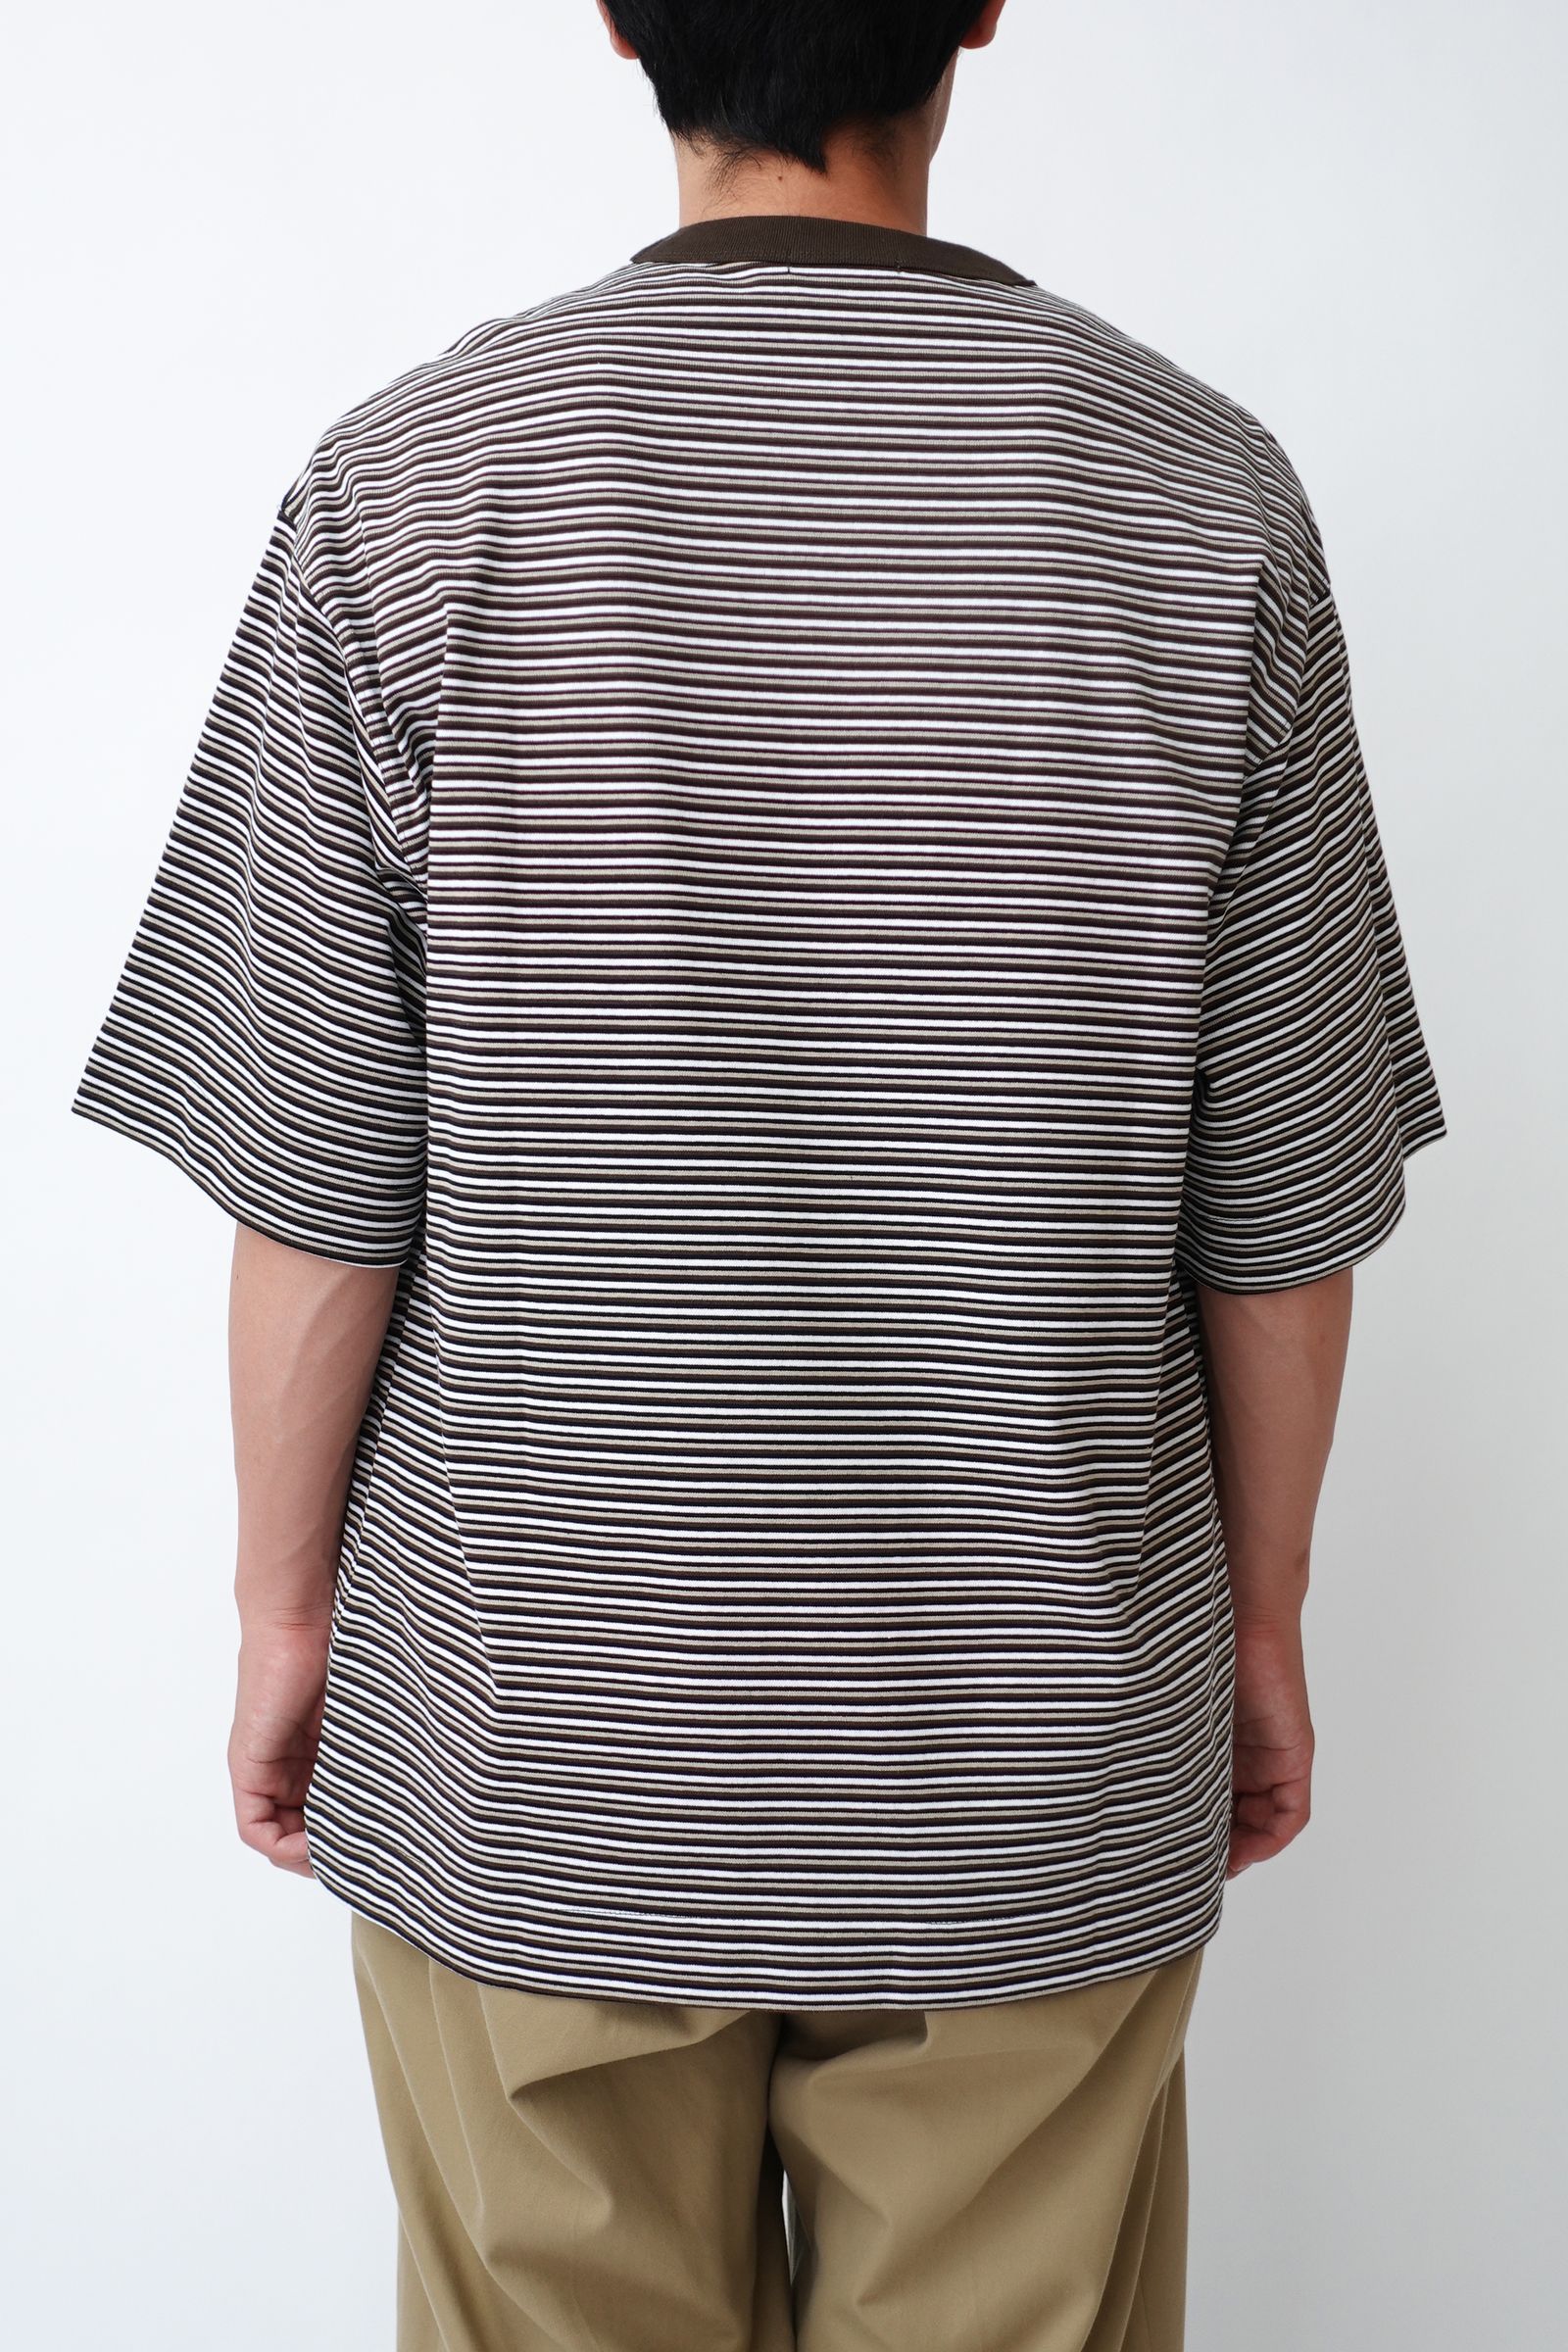 UNIVERSAL PRODUCTS - MULTI BORDER S/S T-SHIRT BROWN 